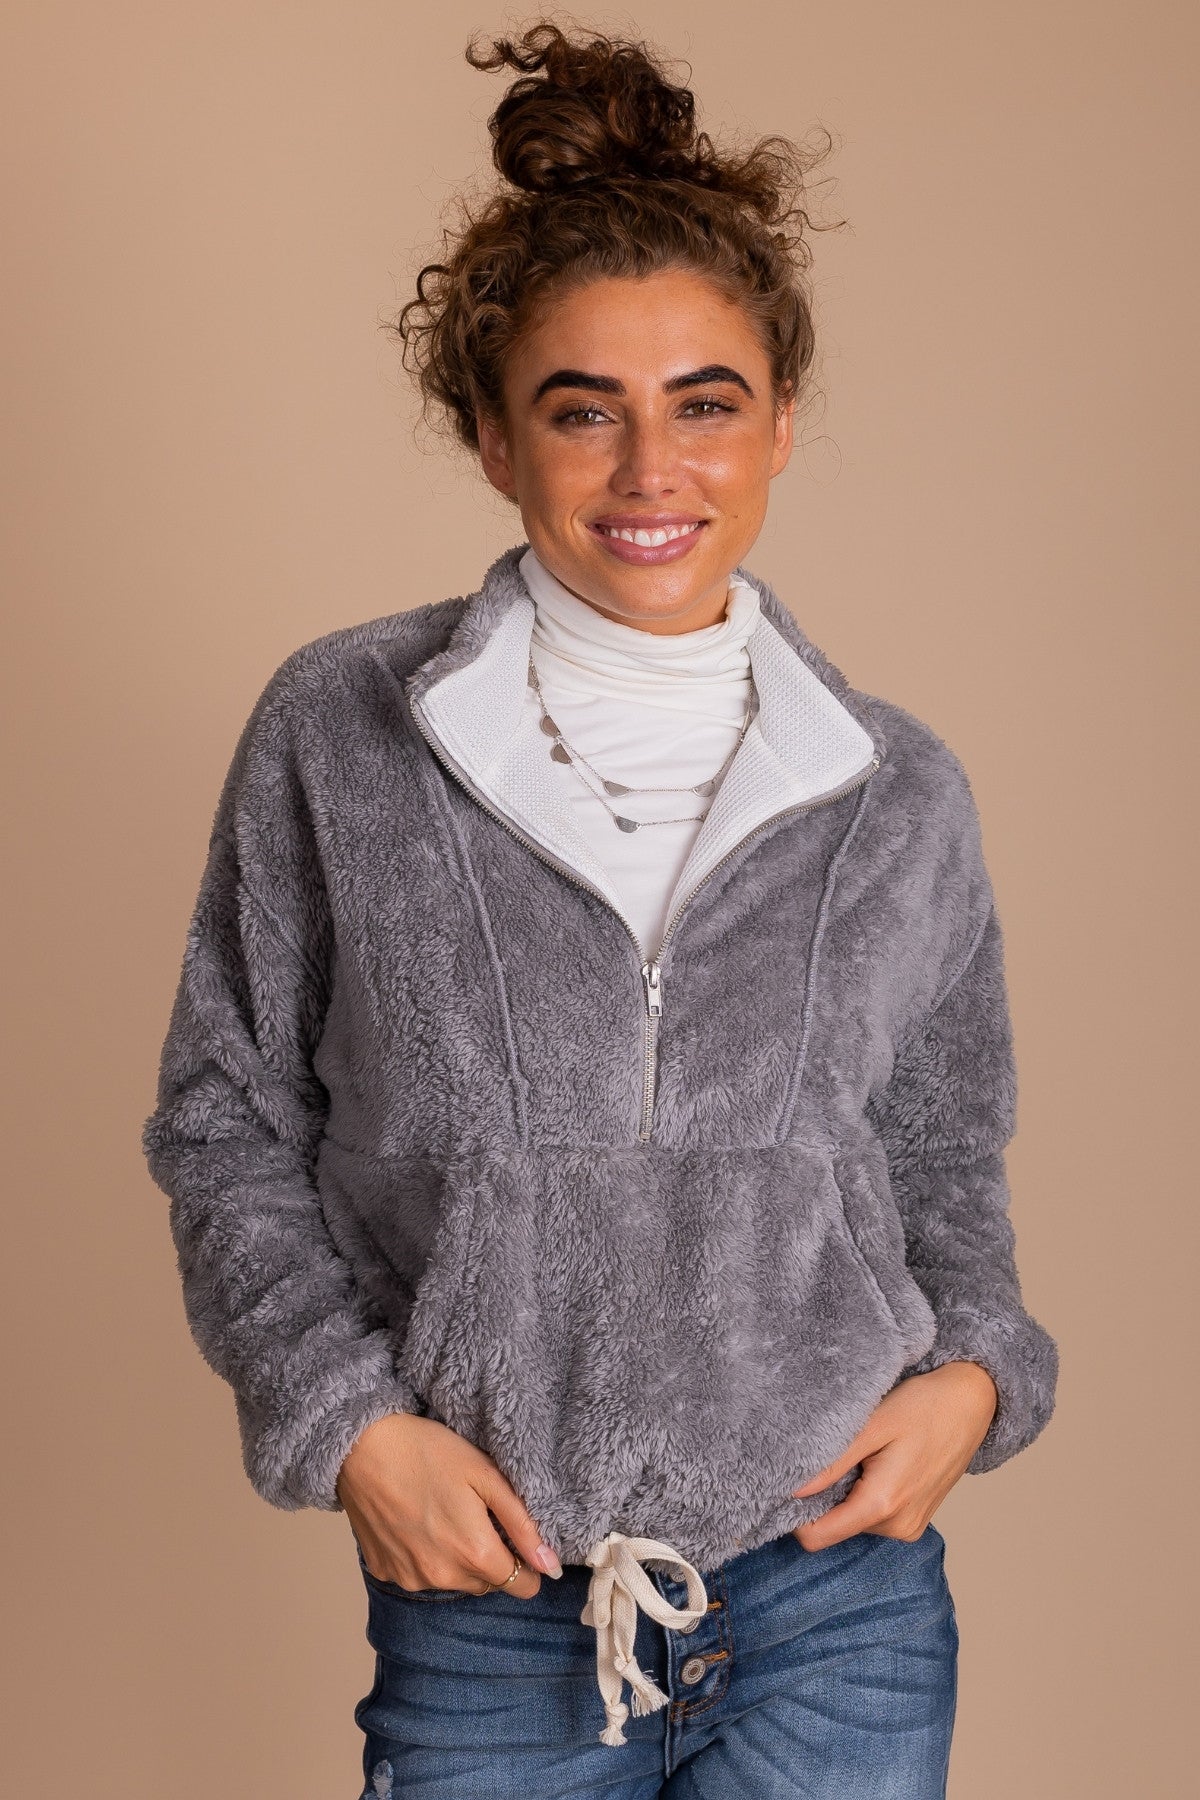 Gray Sherpa Fuzzy Pullover for Women